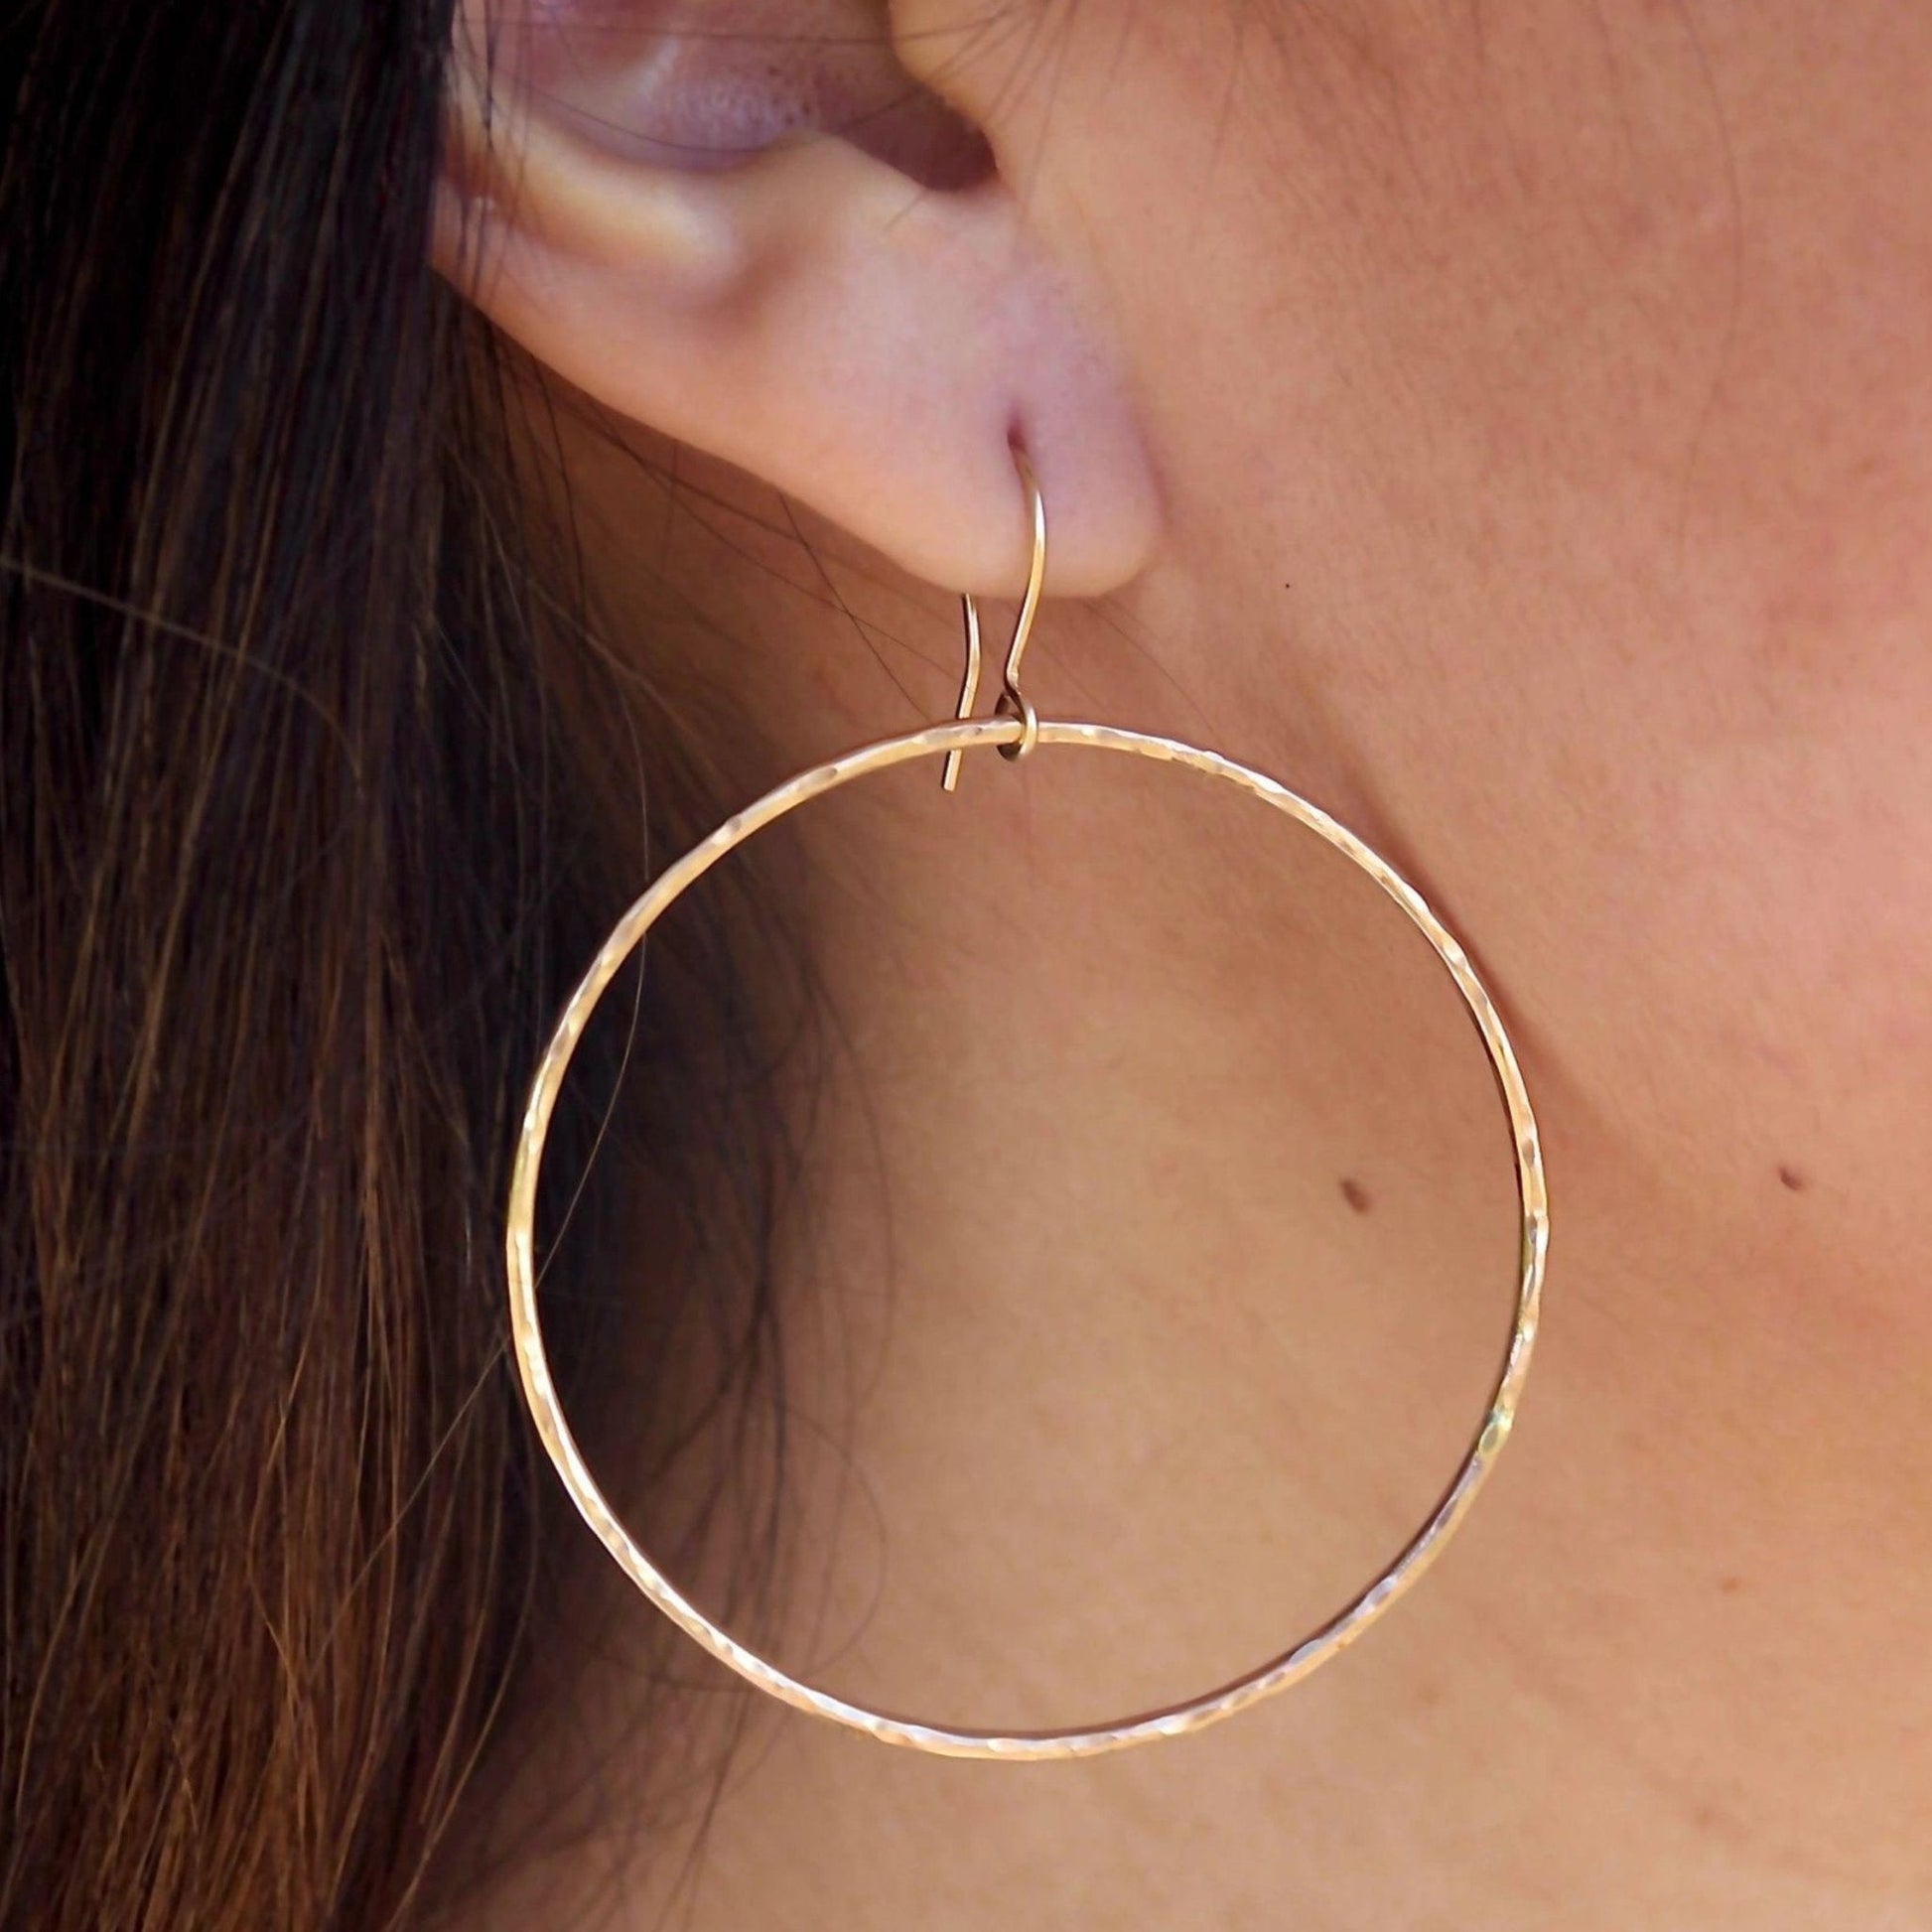 14K Gold Filled Hammered Hoops - Kahakai Collections